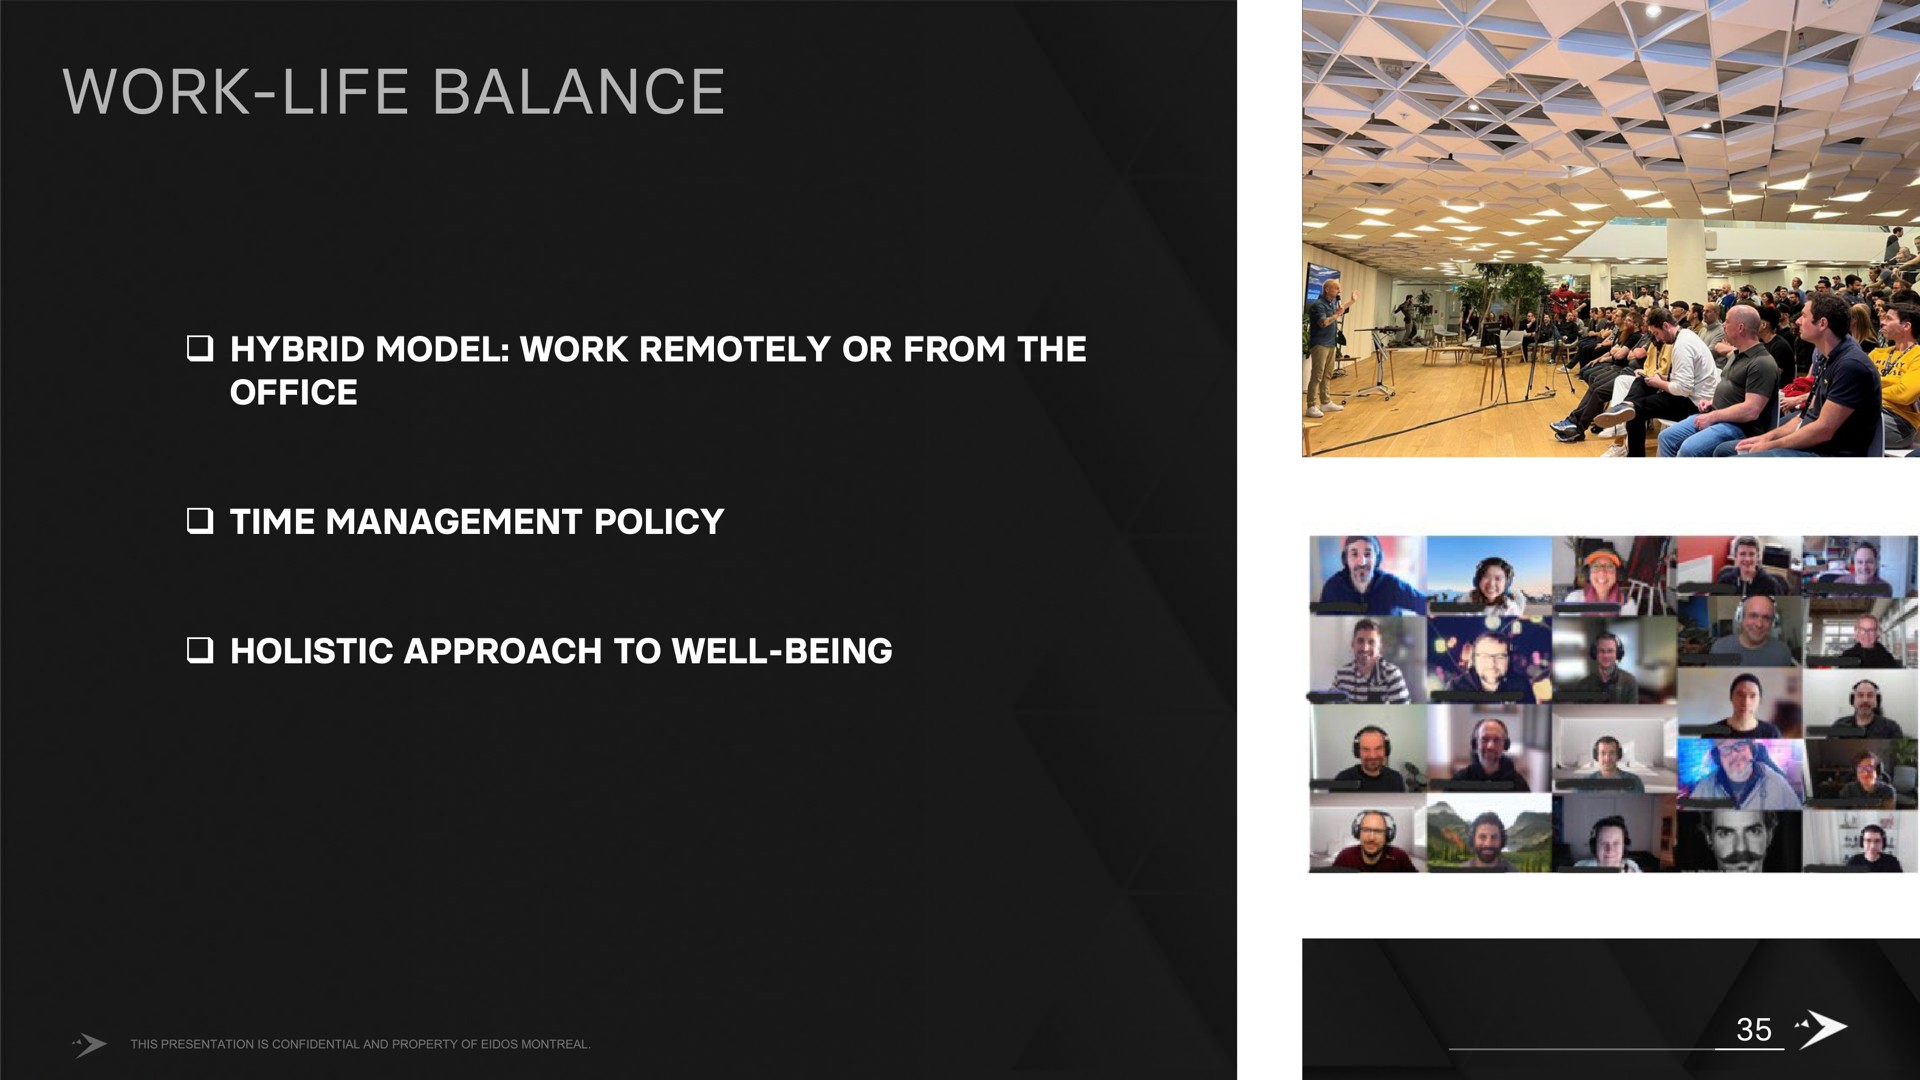 work life balance hybrid model work remotely or from the office time management policy holistic approach to well being | Embracer Group